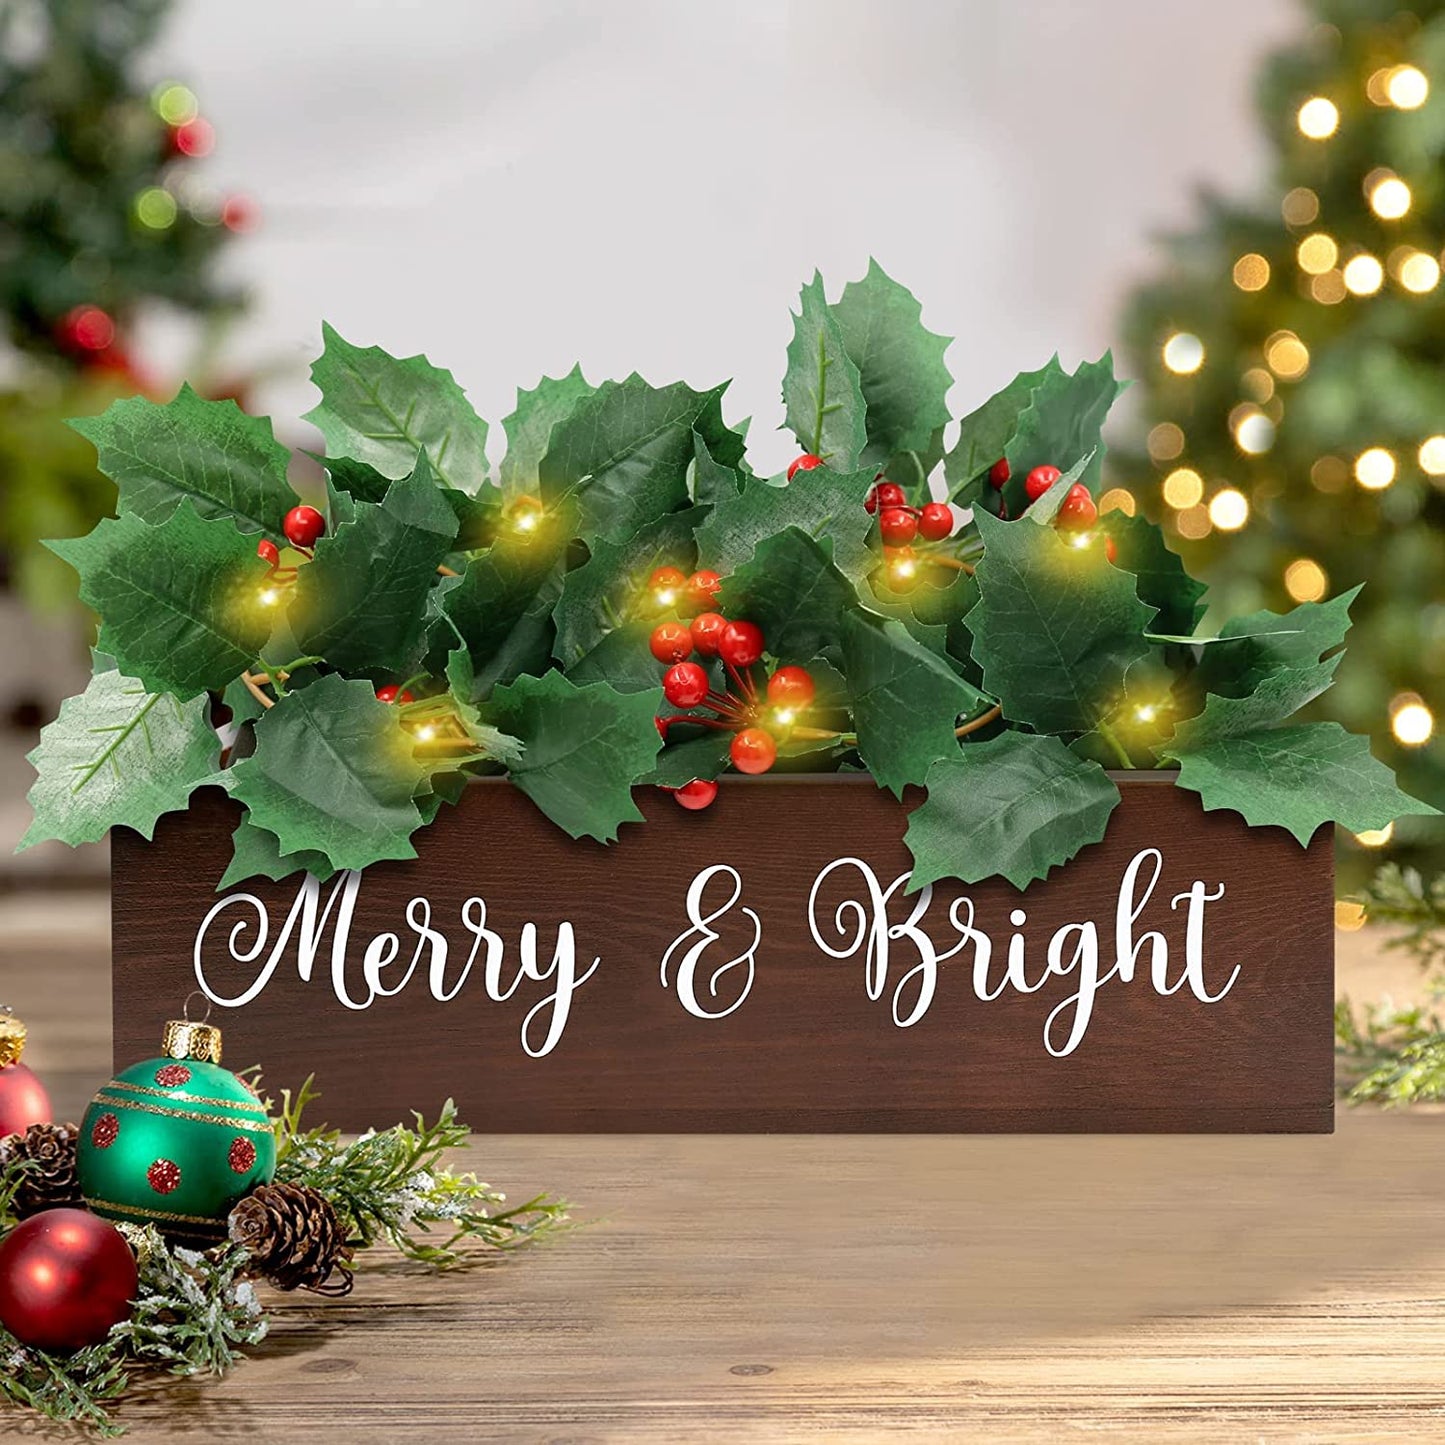 Christmas Wood Box with Berries Poinsettia Leaves LED Lights | momhomedecor